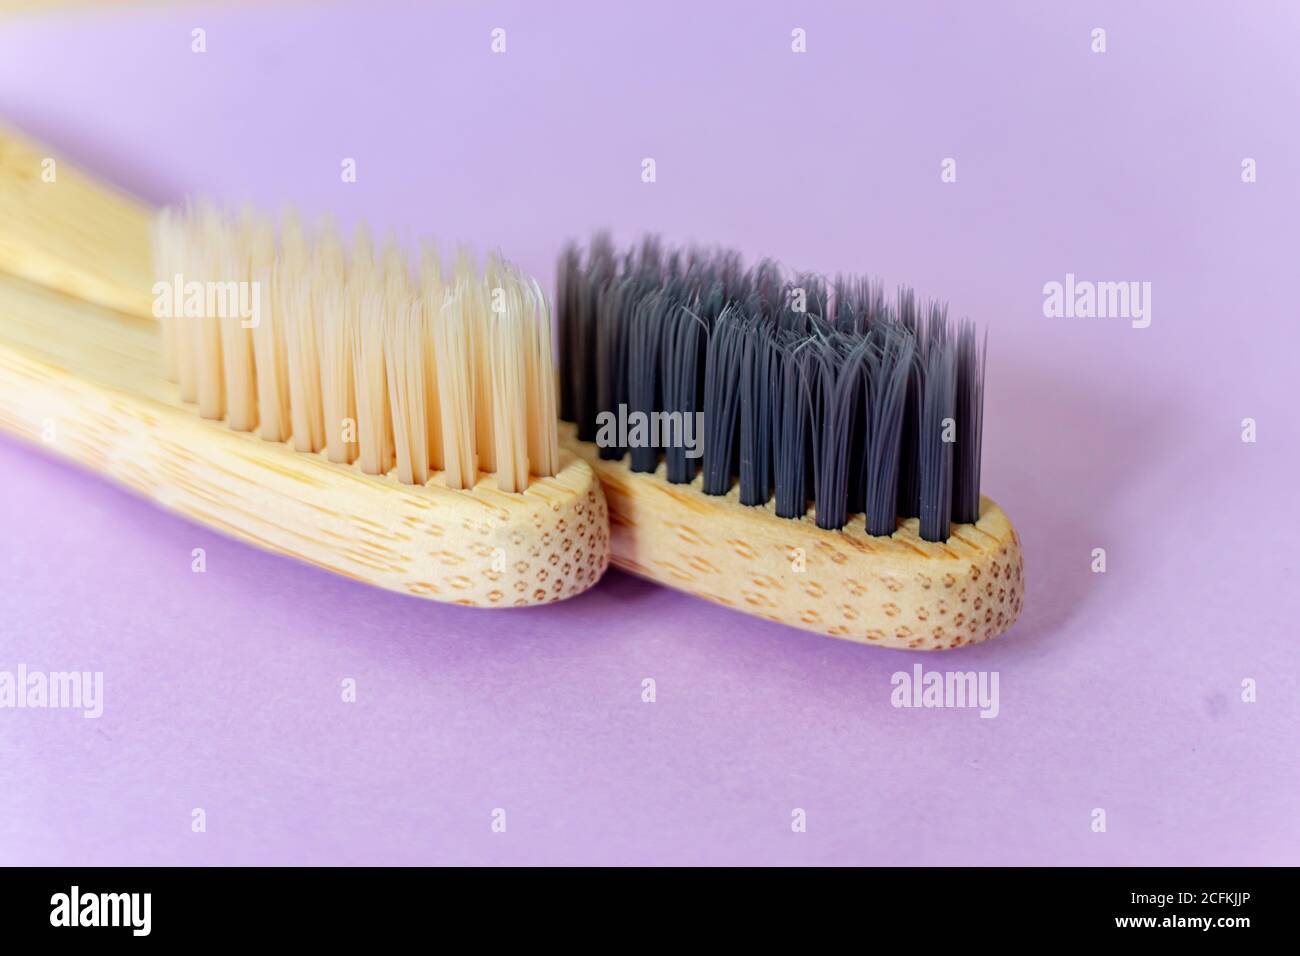 Bamboo Toothbrushes Stock Photo